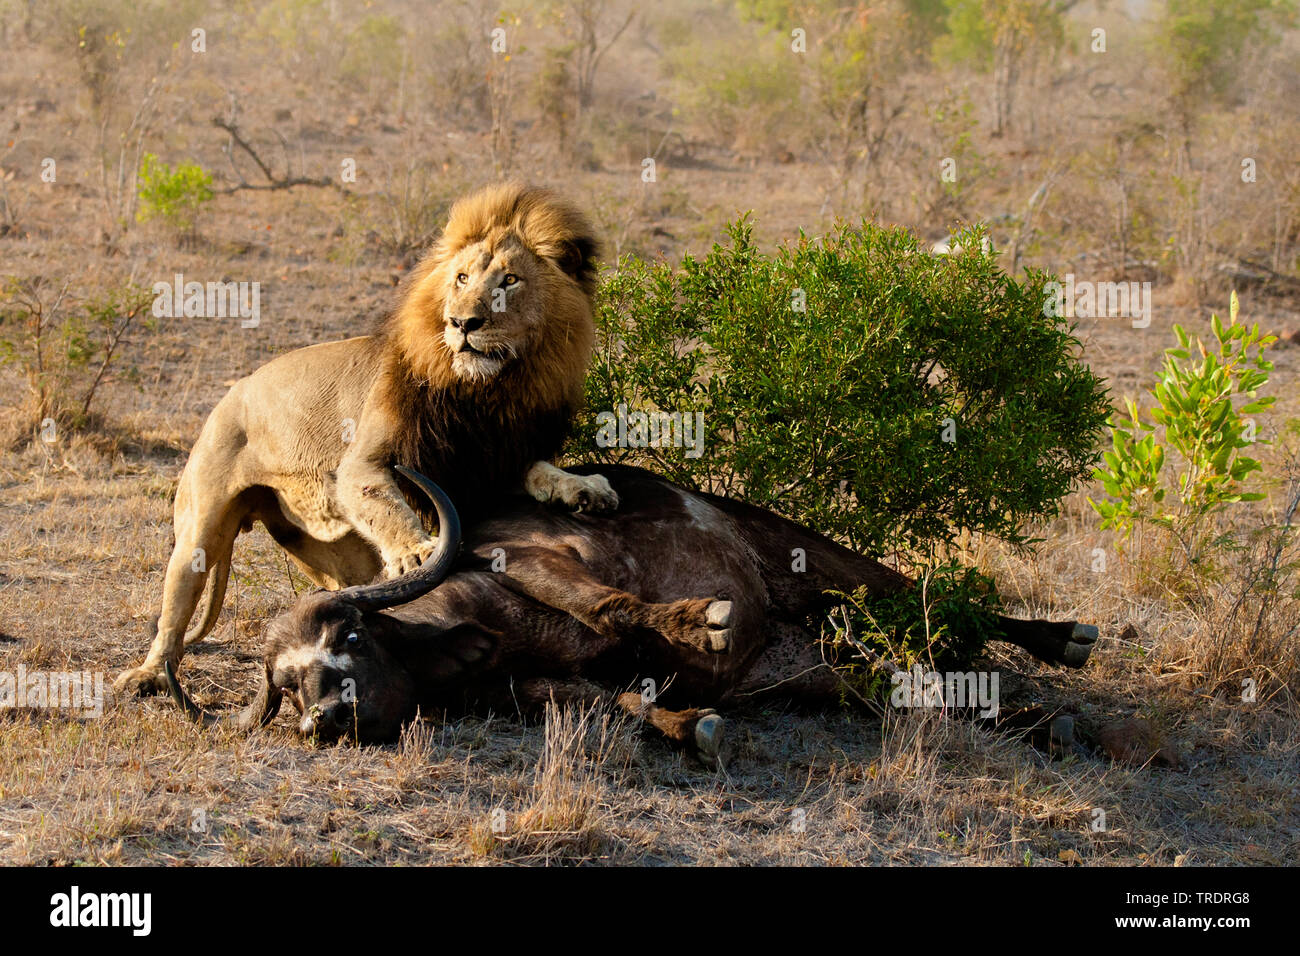 Lion Killing High Resolution Stock Photography and Images - Alamy